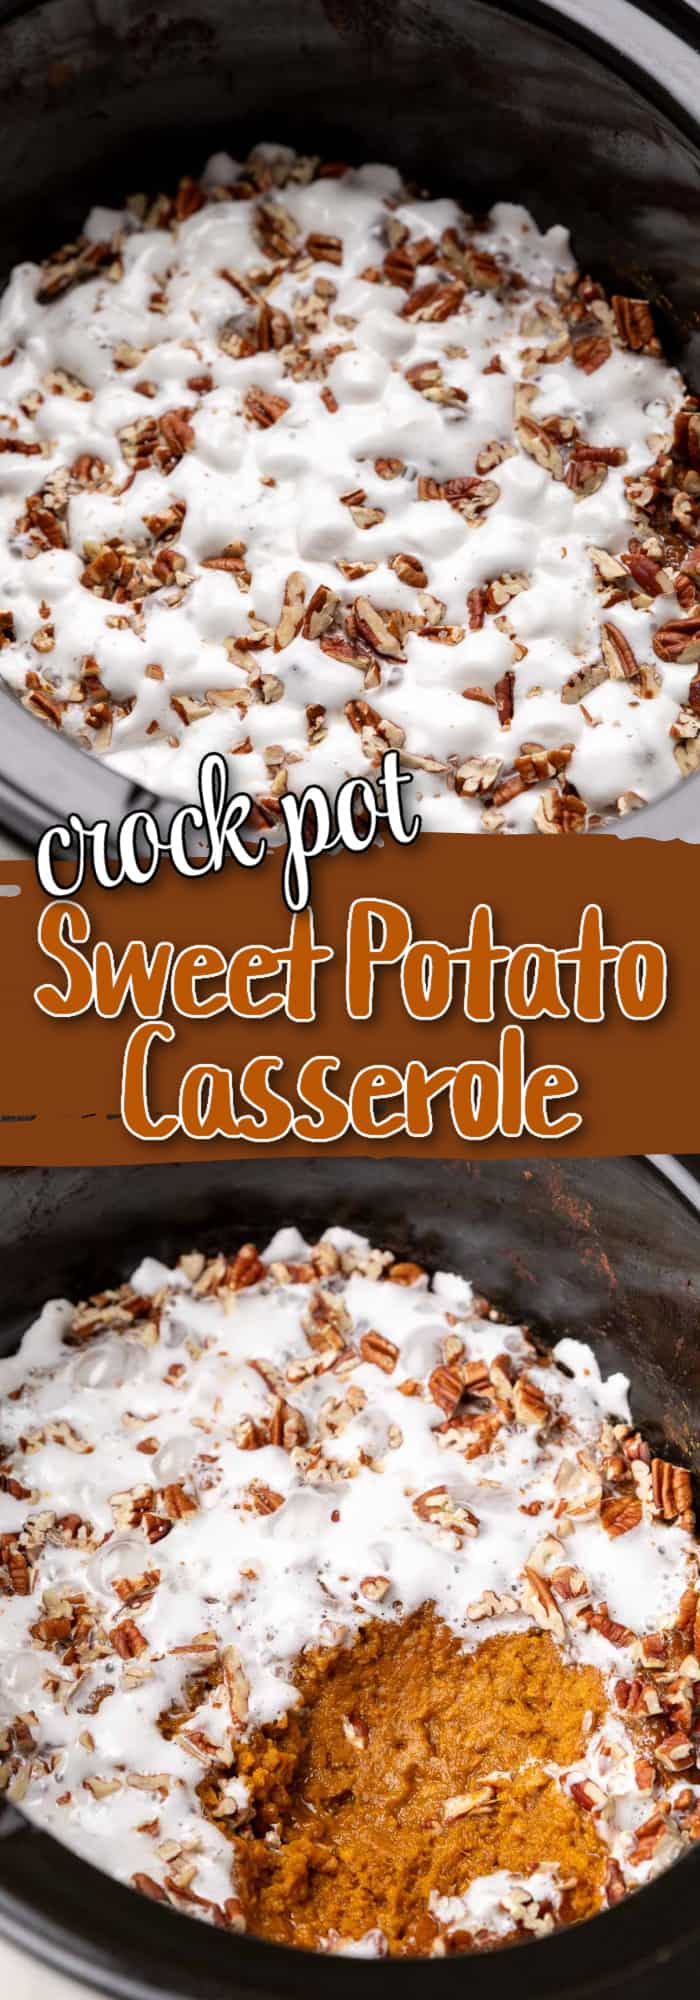 Two photos of sweet potato casserole in a collage.